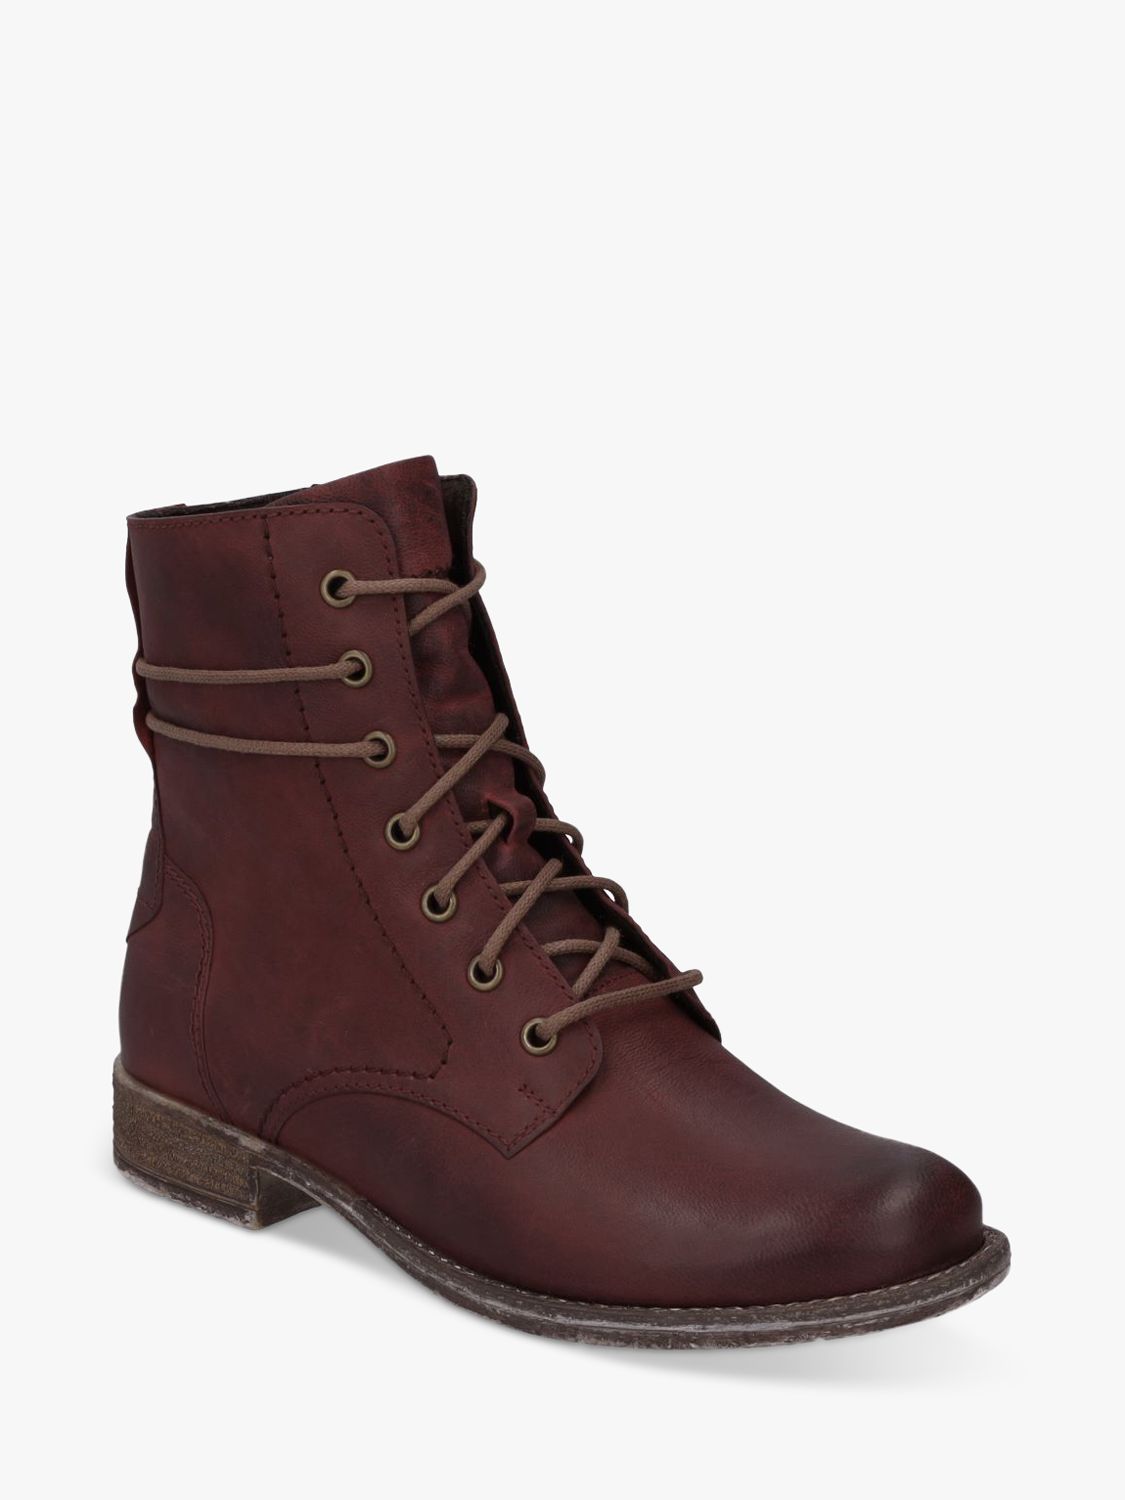 Josef Seibel Sienna 70 Lace Up Leather Ankle Boots, Bordeaux at John ...